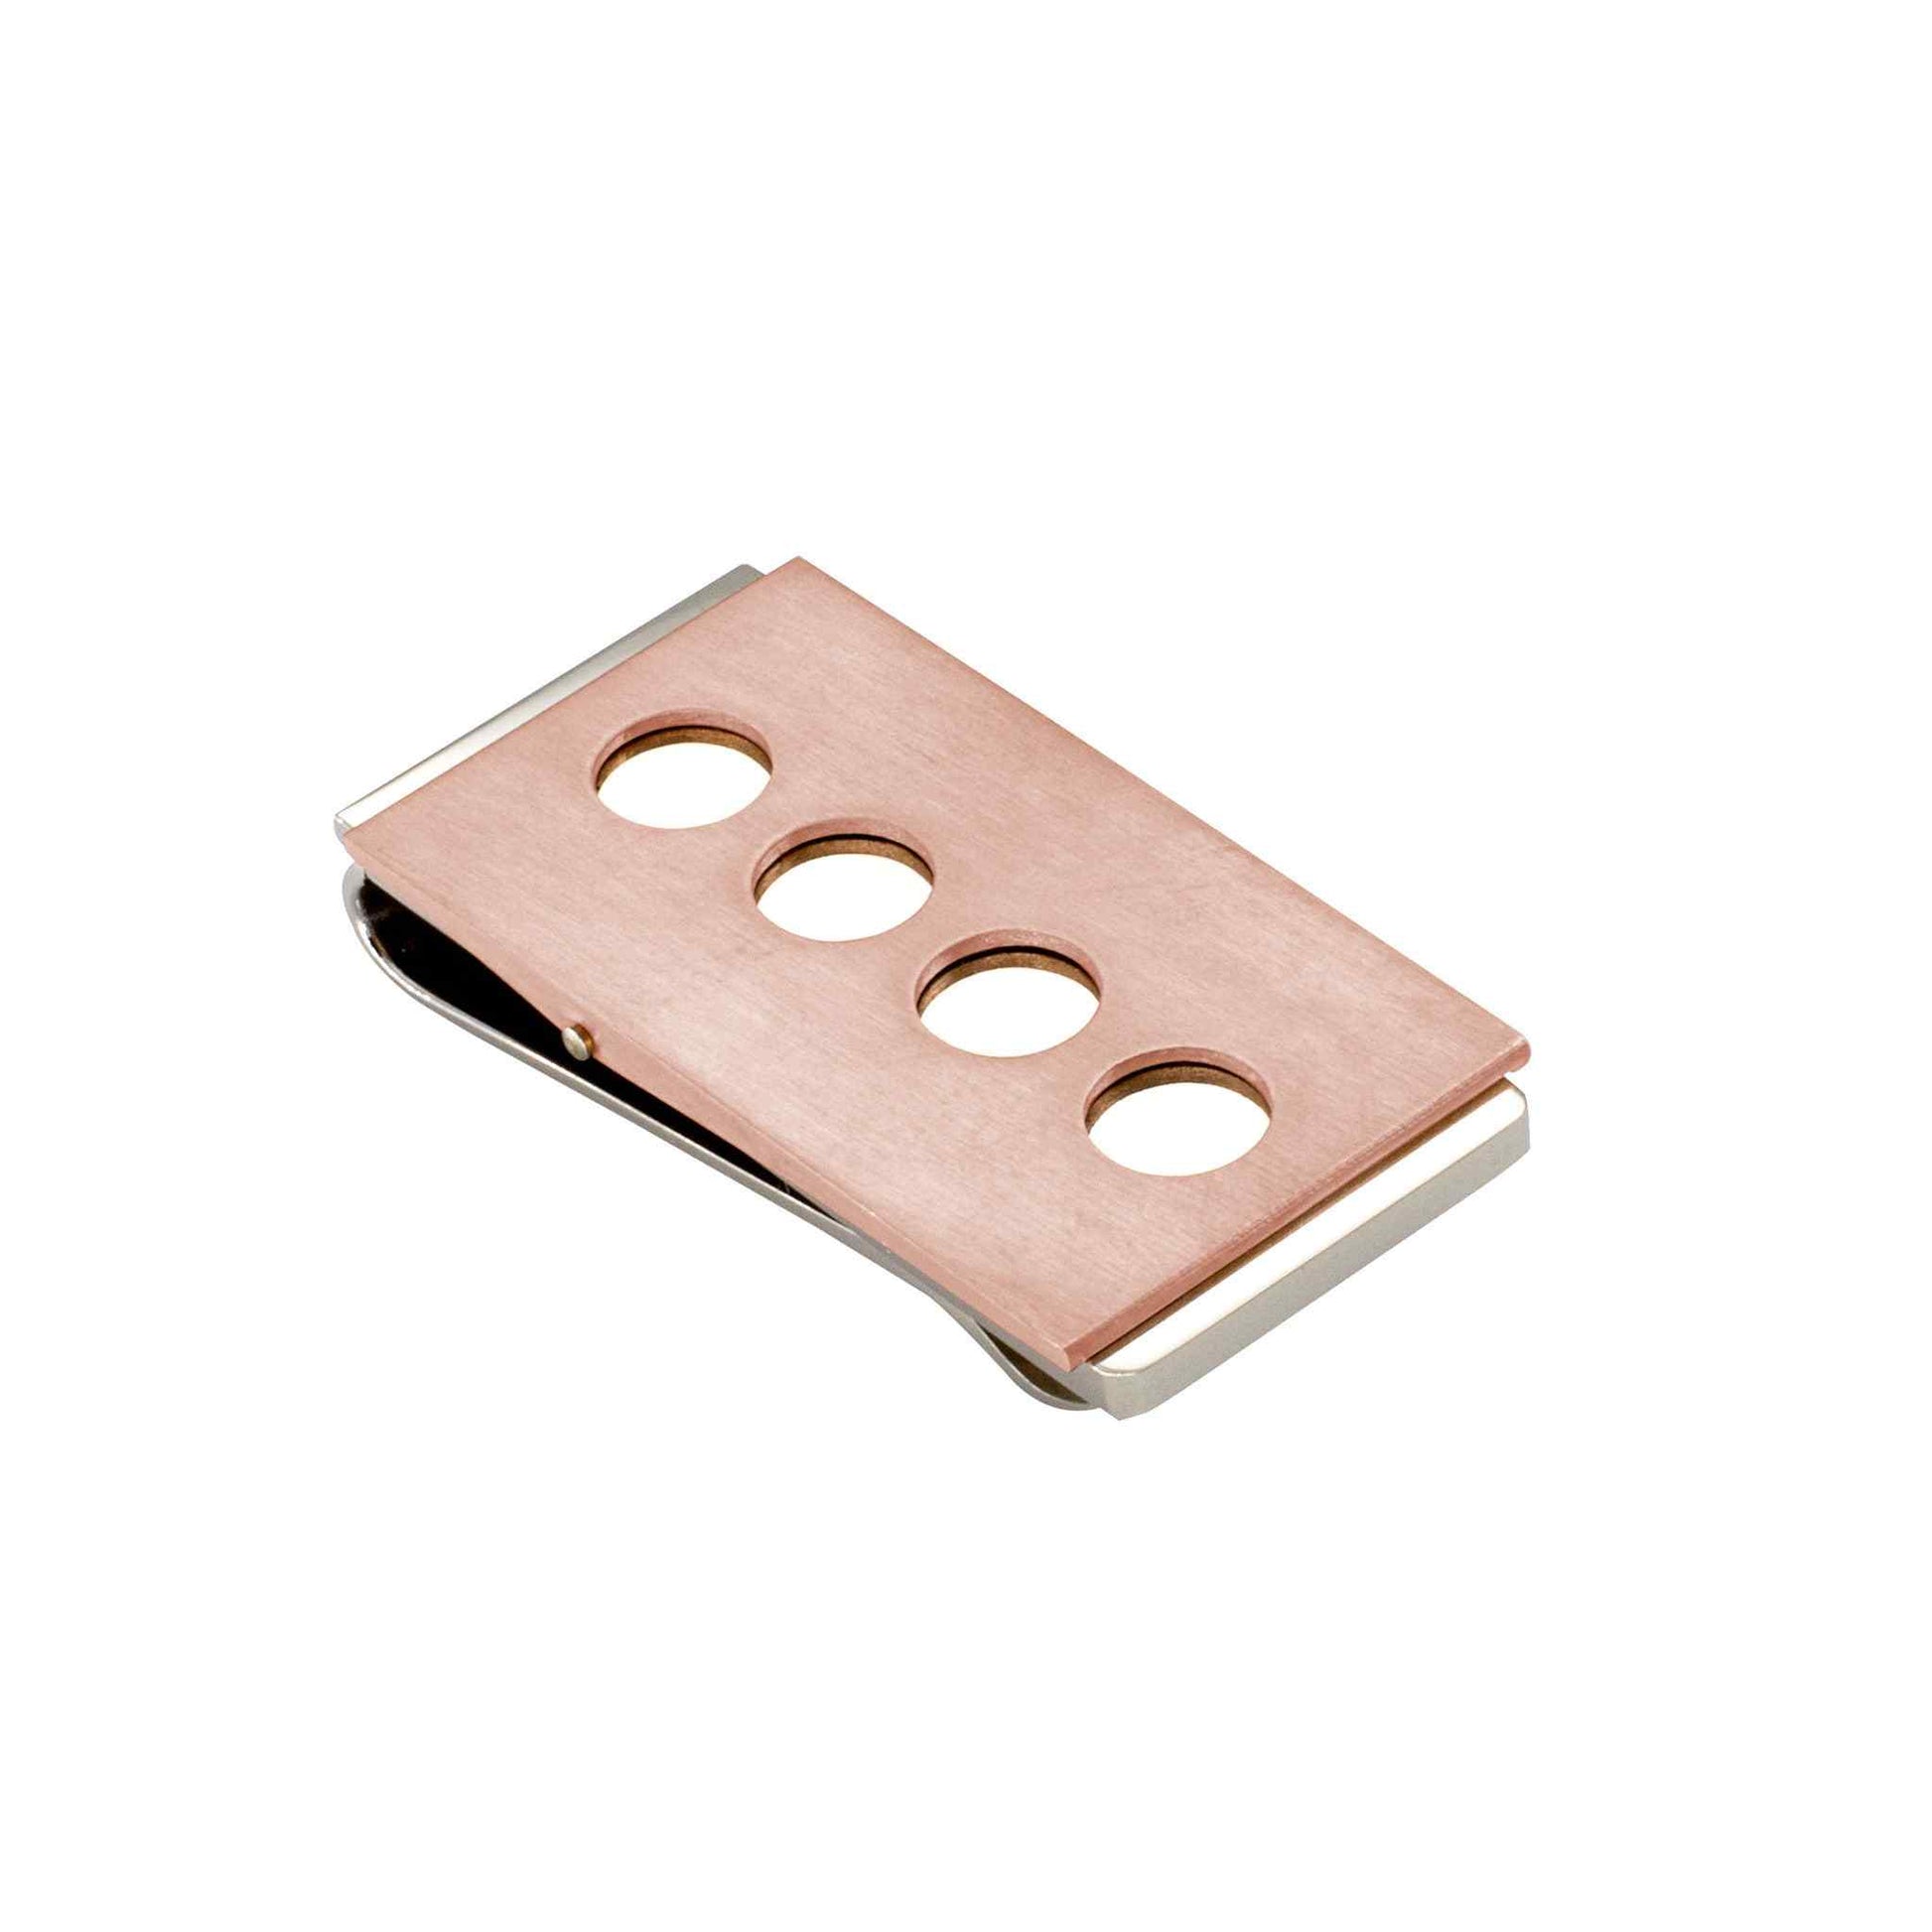 A stainless steel and rose gold pvd cut out circle money clip displayed on a neutral white background.